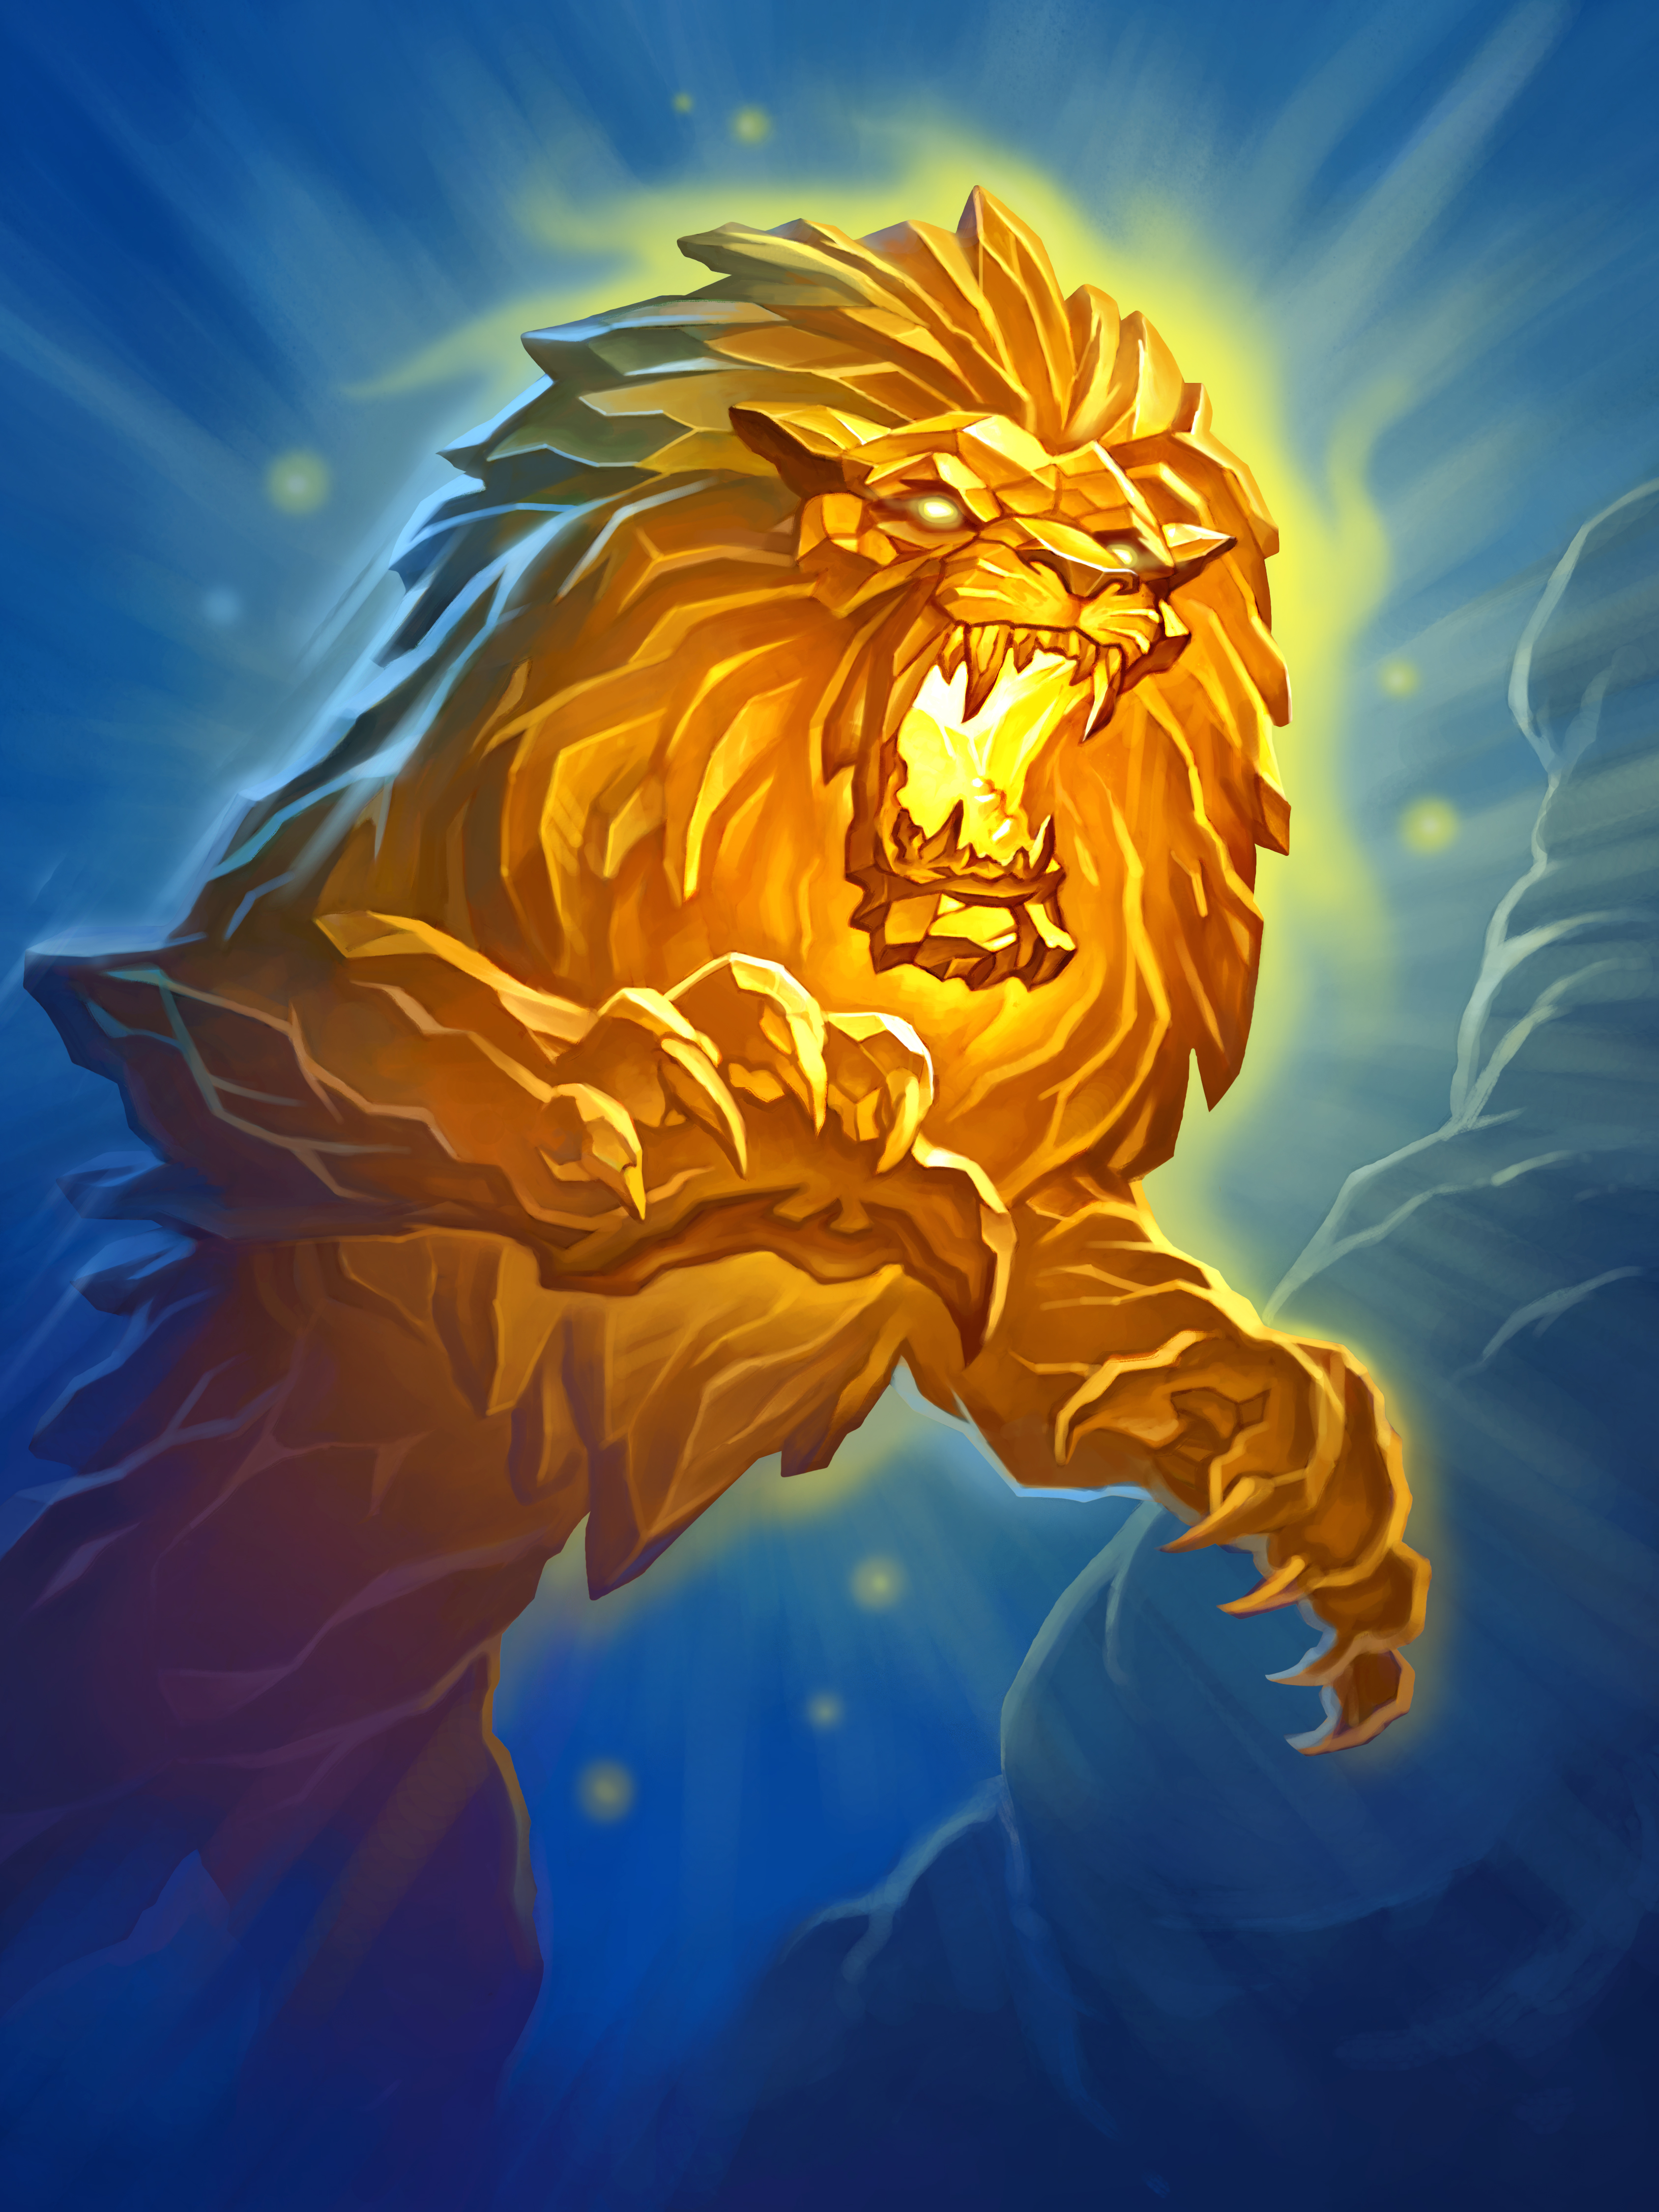 General 3375x4500 Hearthstone: Heroes of Warcraft Hearthstone: Kobolds and Catacombs lion PC gaming portrait display digital art